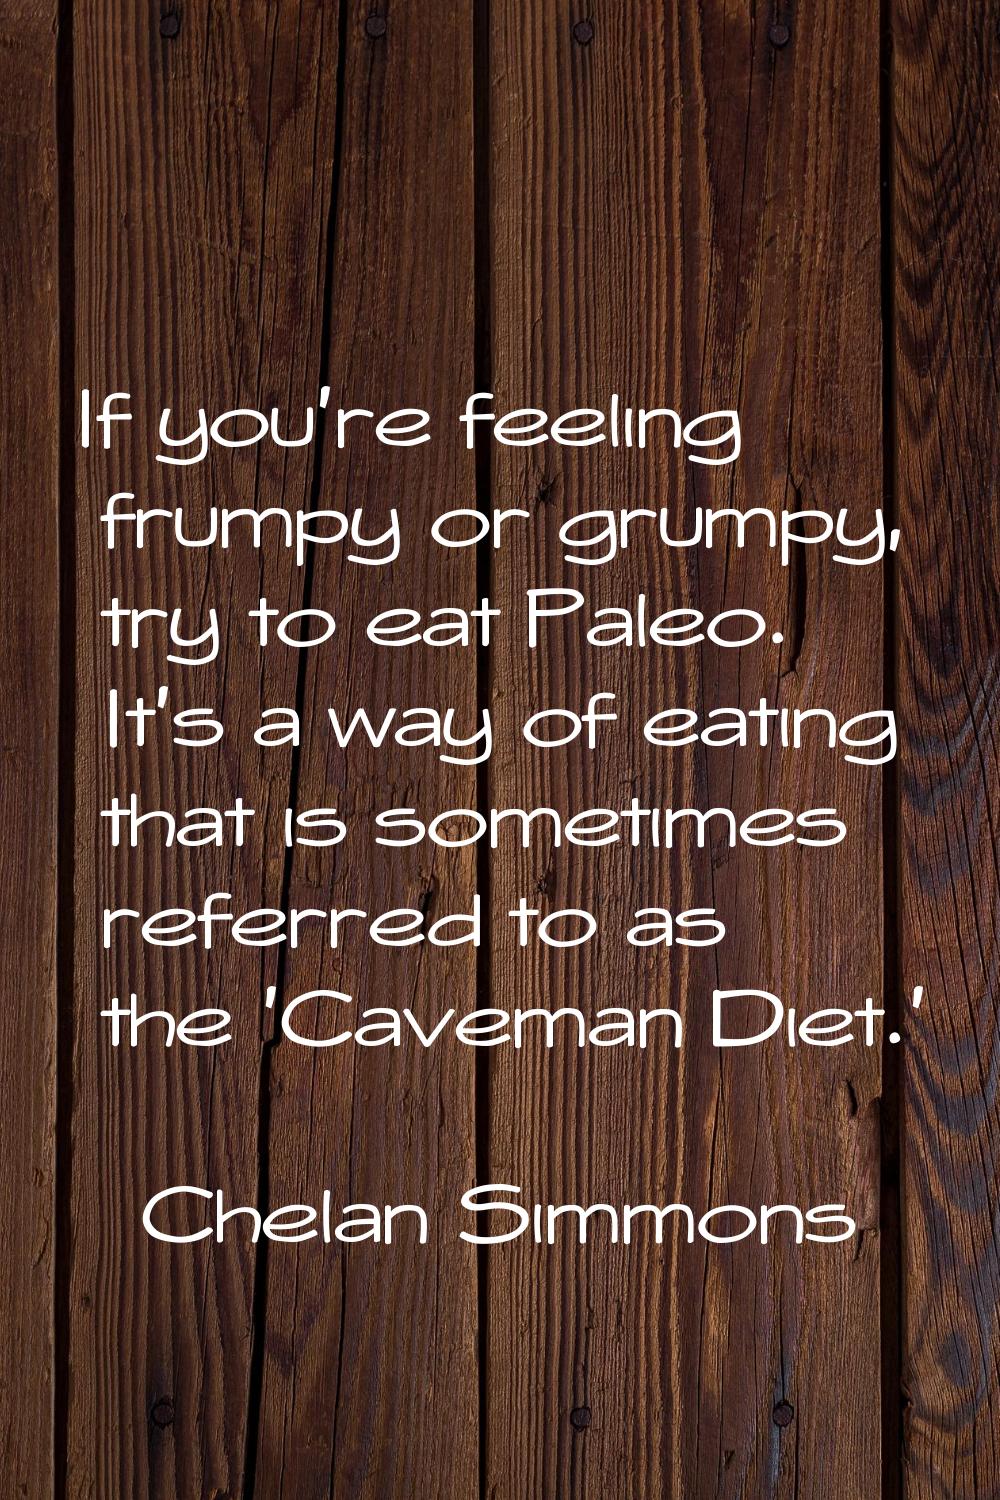 If you're feeling frumpy or grumpy, try to eat Paleo. It's a way of eating that is sometimes referr